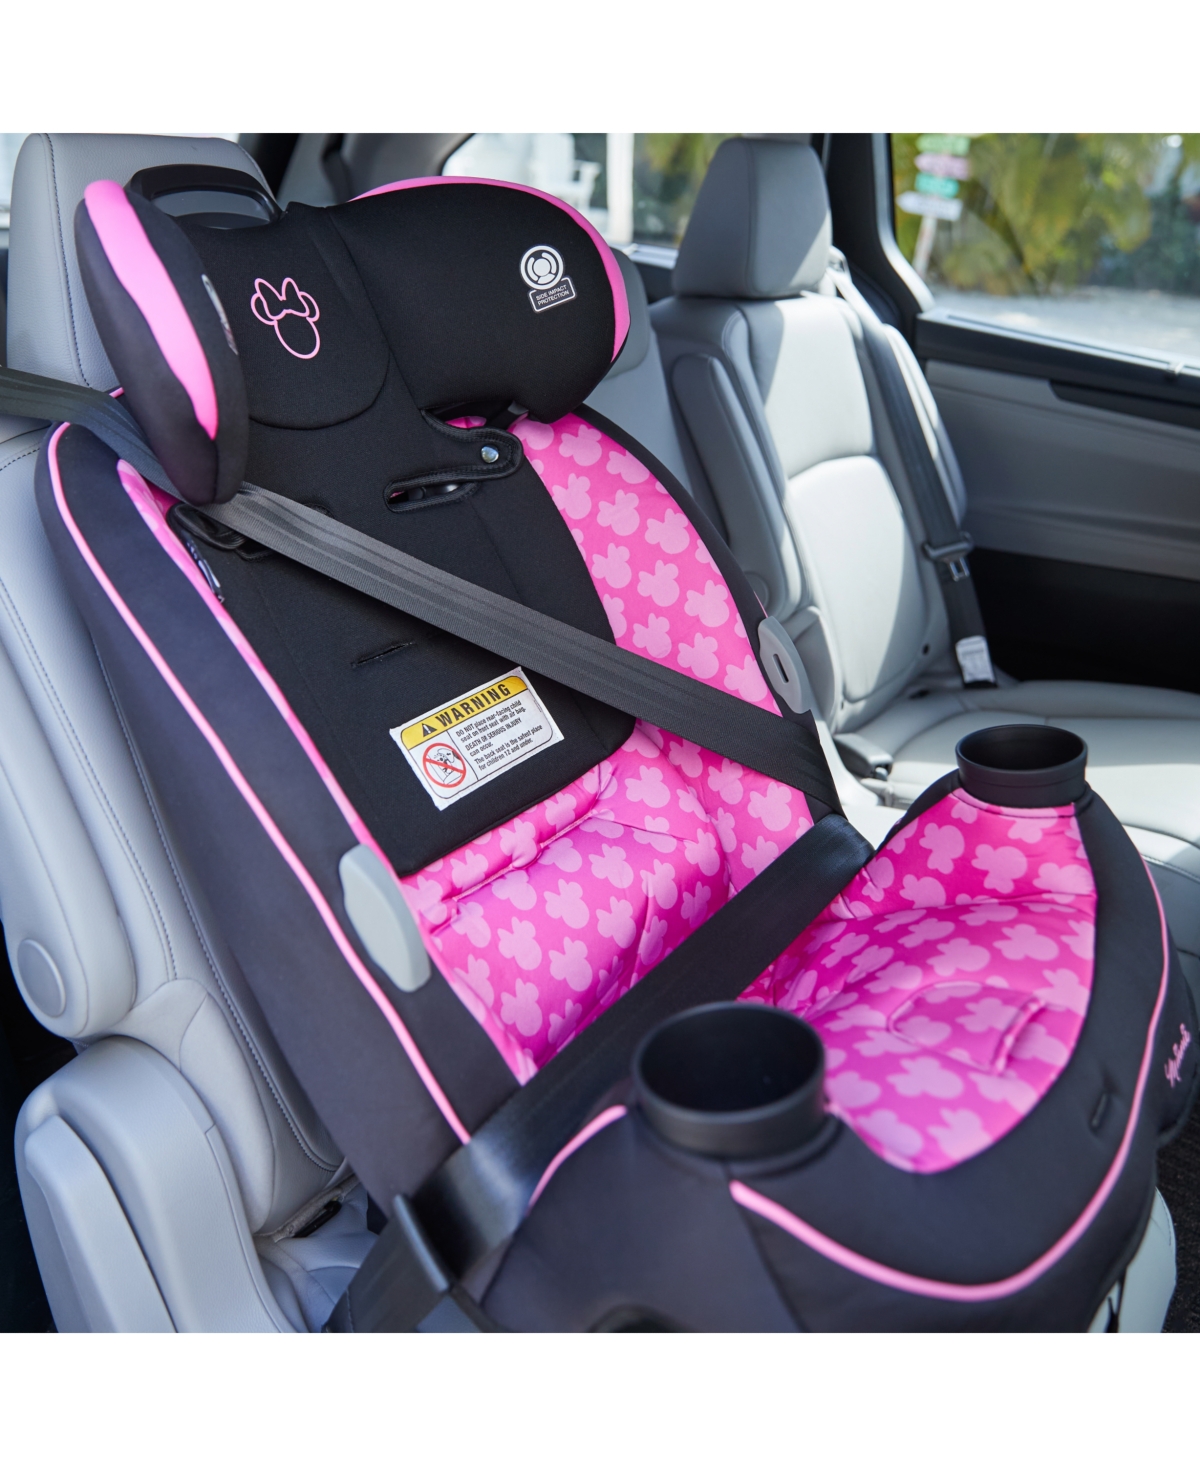 Shop Disney Baby Grow And Go All In One Convertible Car Seat In Pink